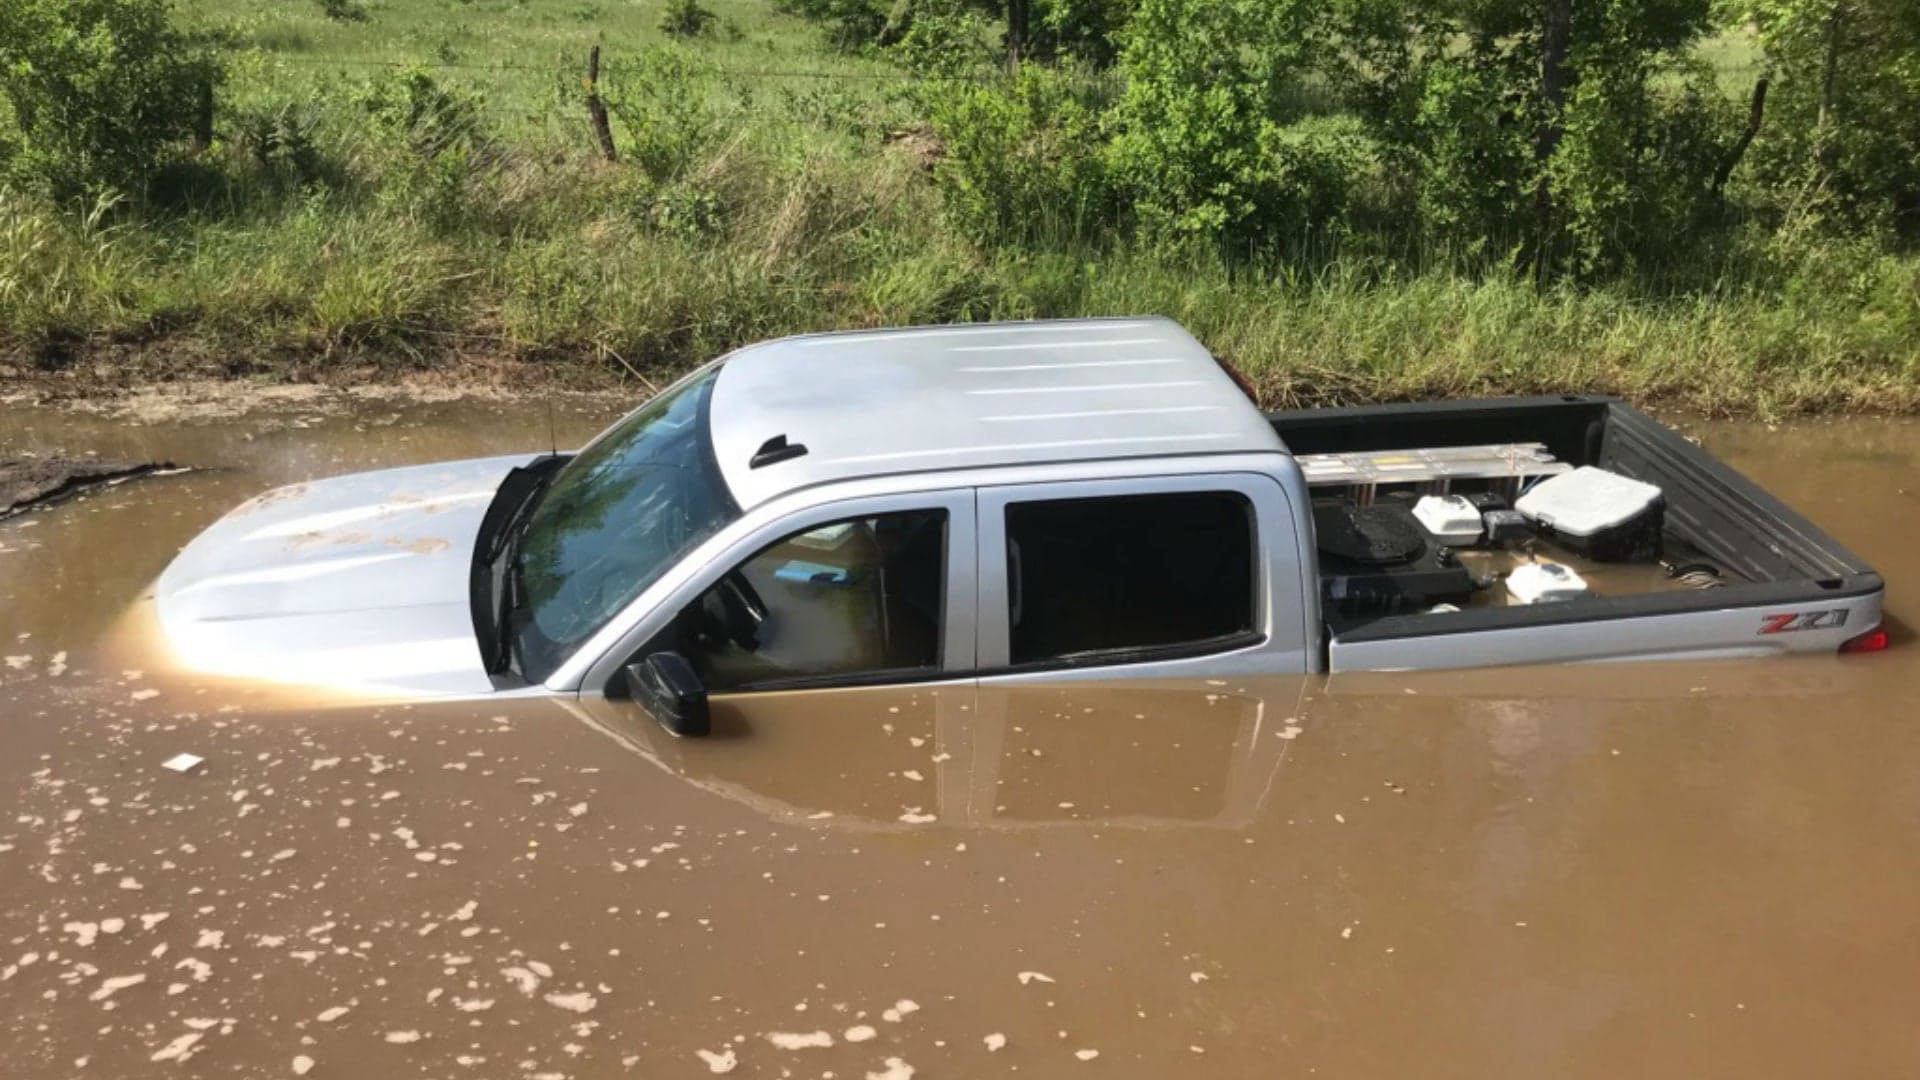 Defiant Chevrolet Silverado Pickup Truck Driver Learns ‘Turn Around Don’t Drown’ Lesson the Hard Way